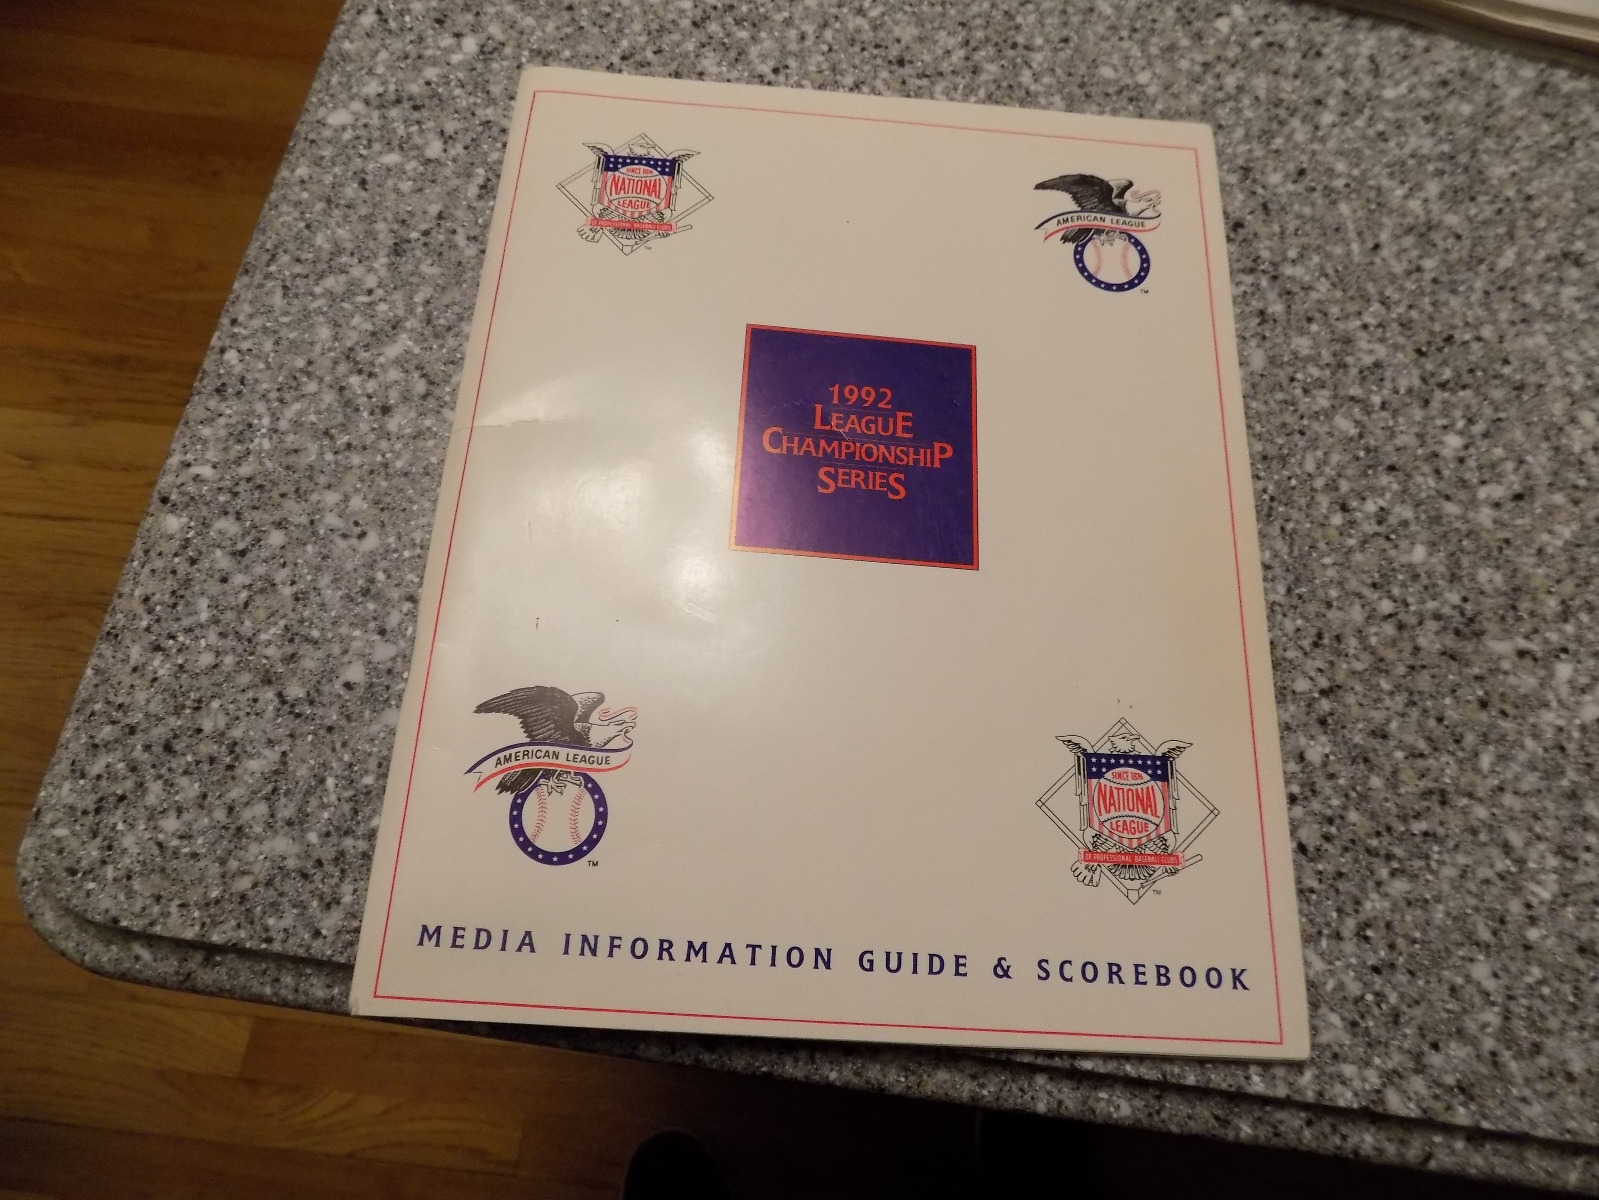 1992 MLB LEAGUE CHAMPIONSHIP SERIES LCS MEDIA INFORMATION GUIDE 